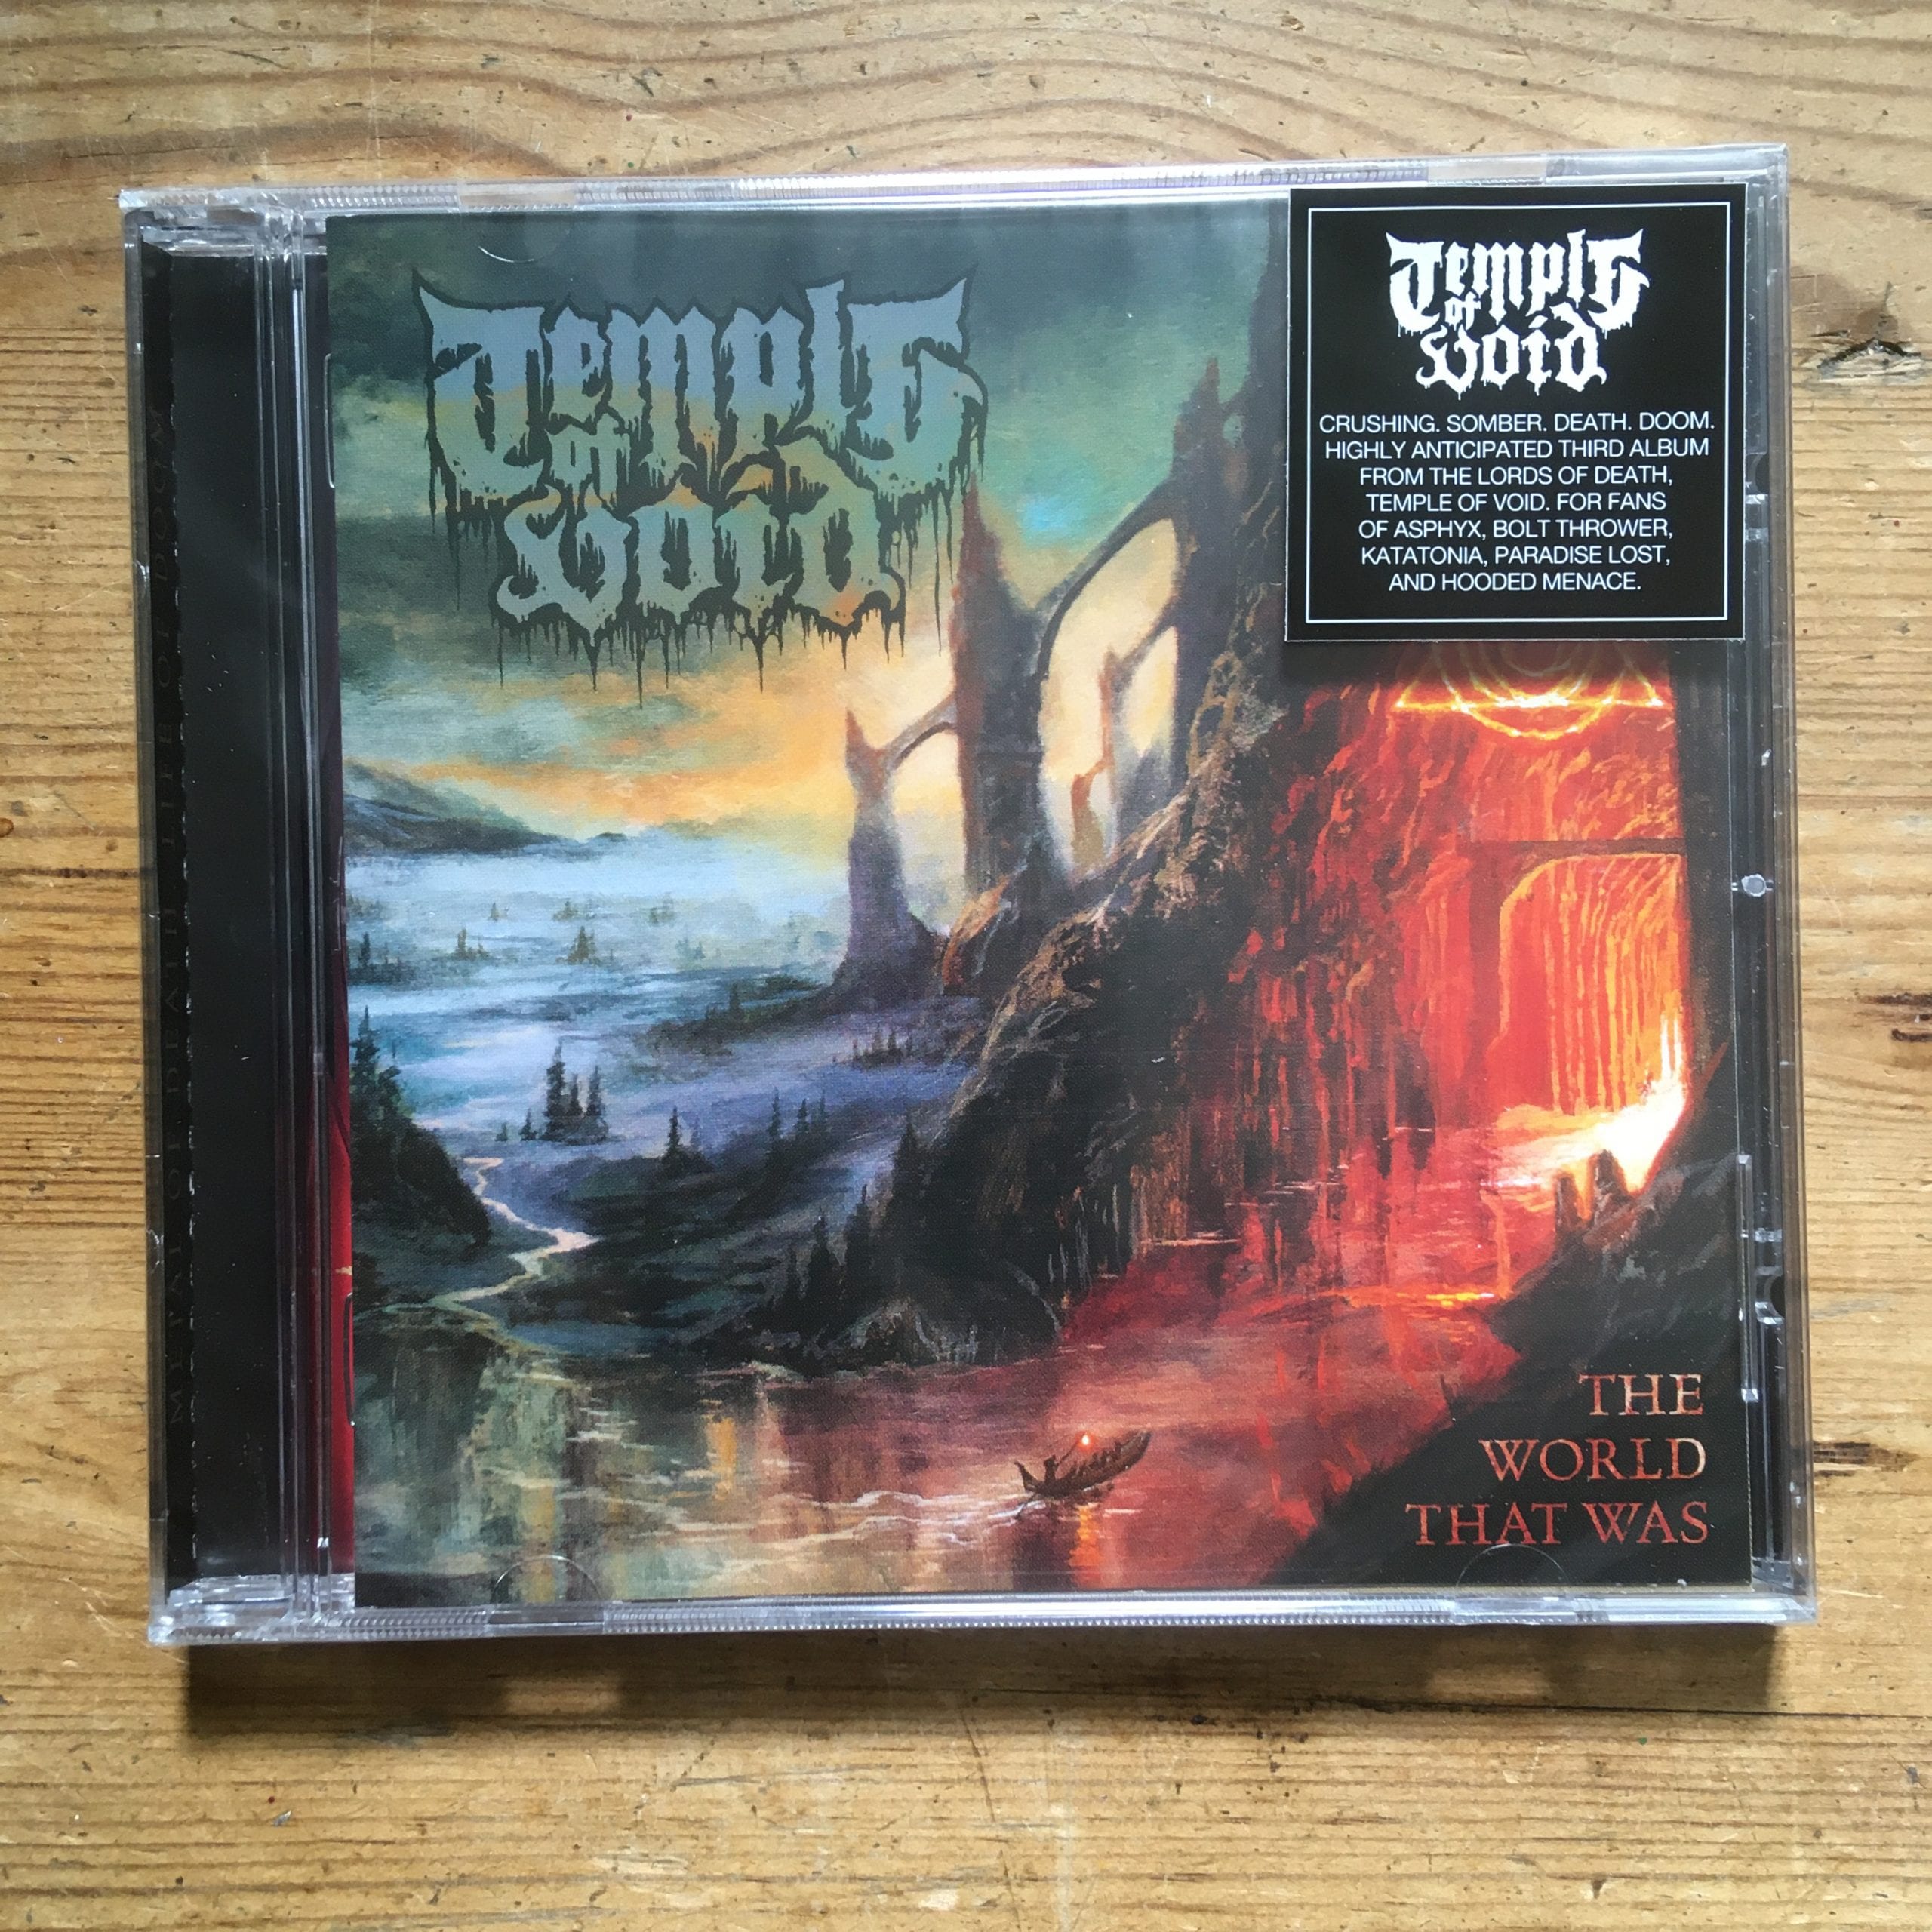 Photo of the Temple of Void - "The World That Was" CD